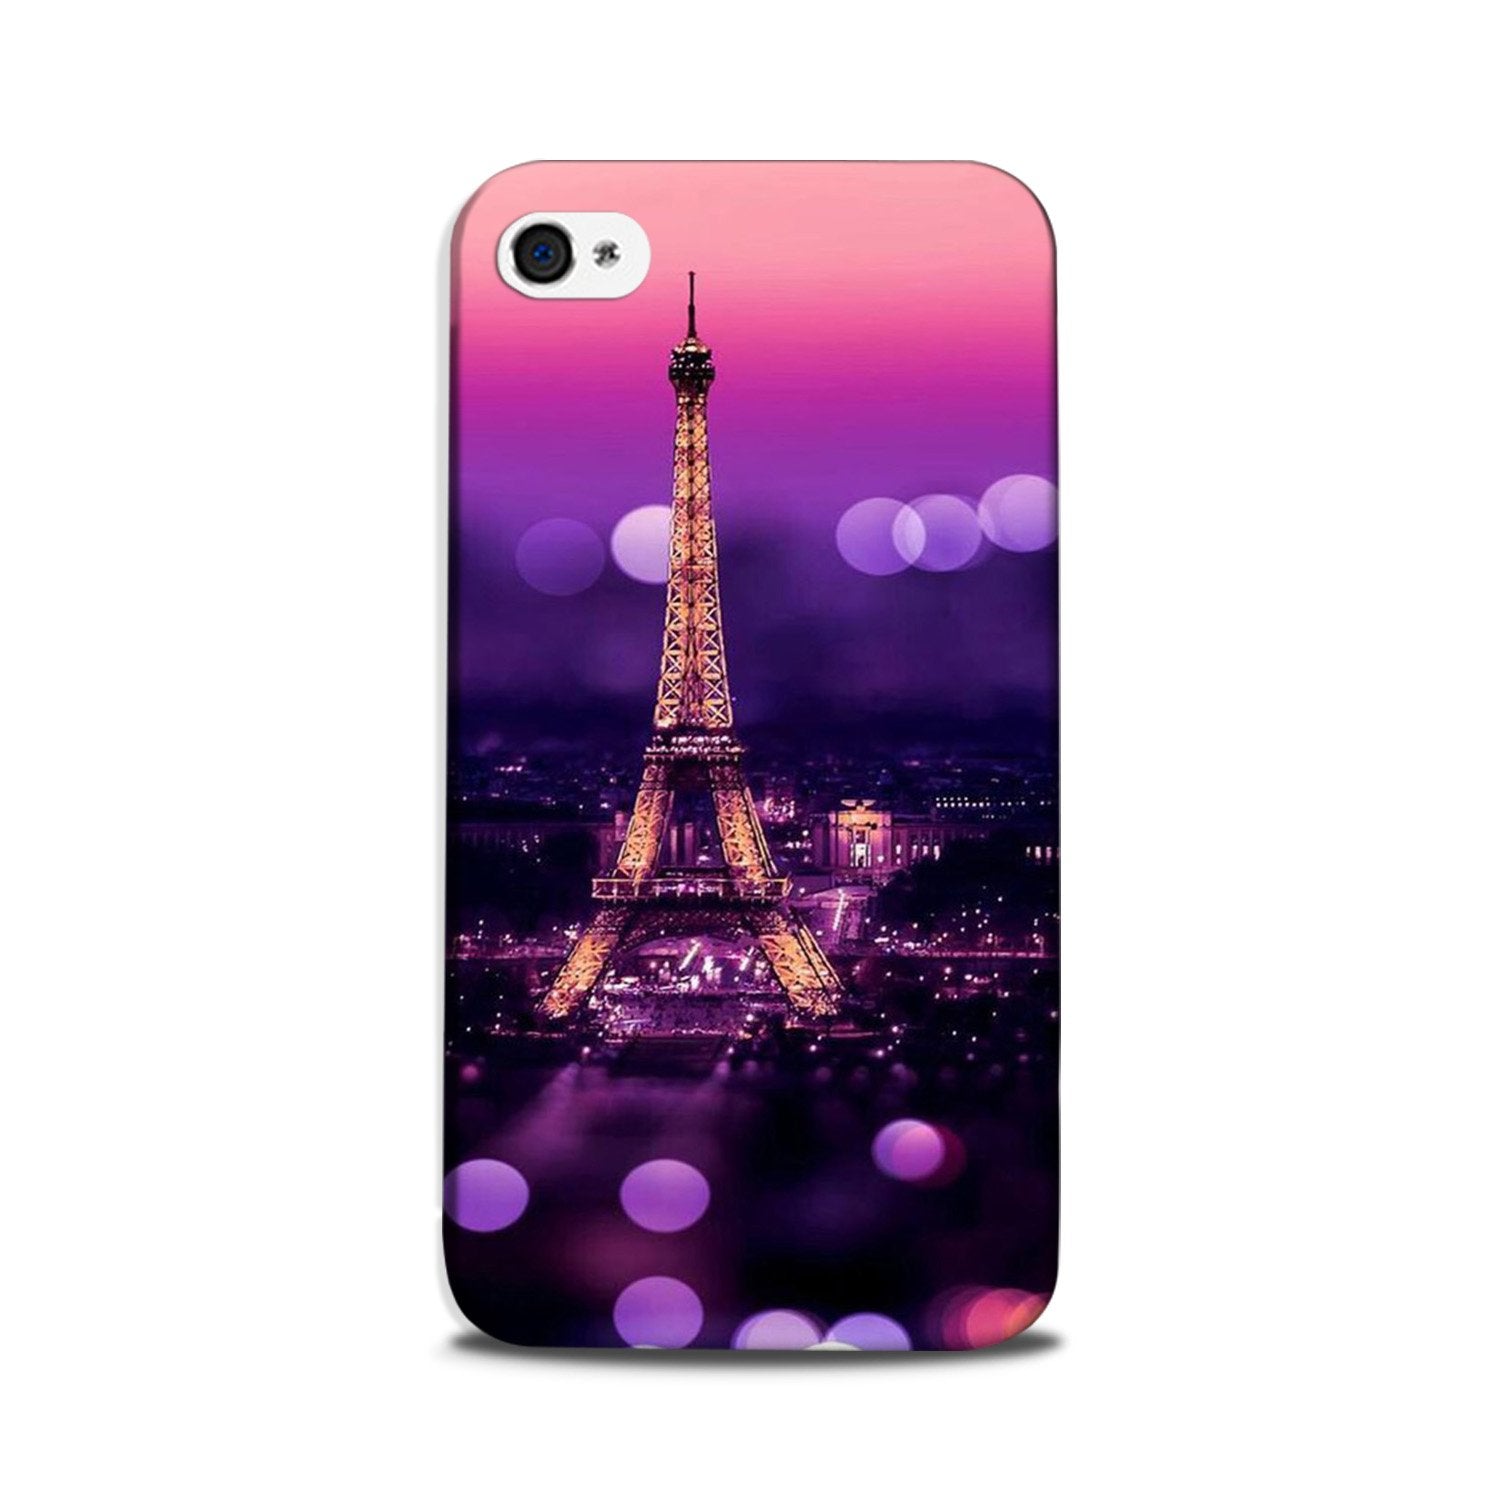 Eiffel Tower Case for iPhone 5/ 5s